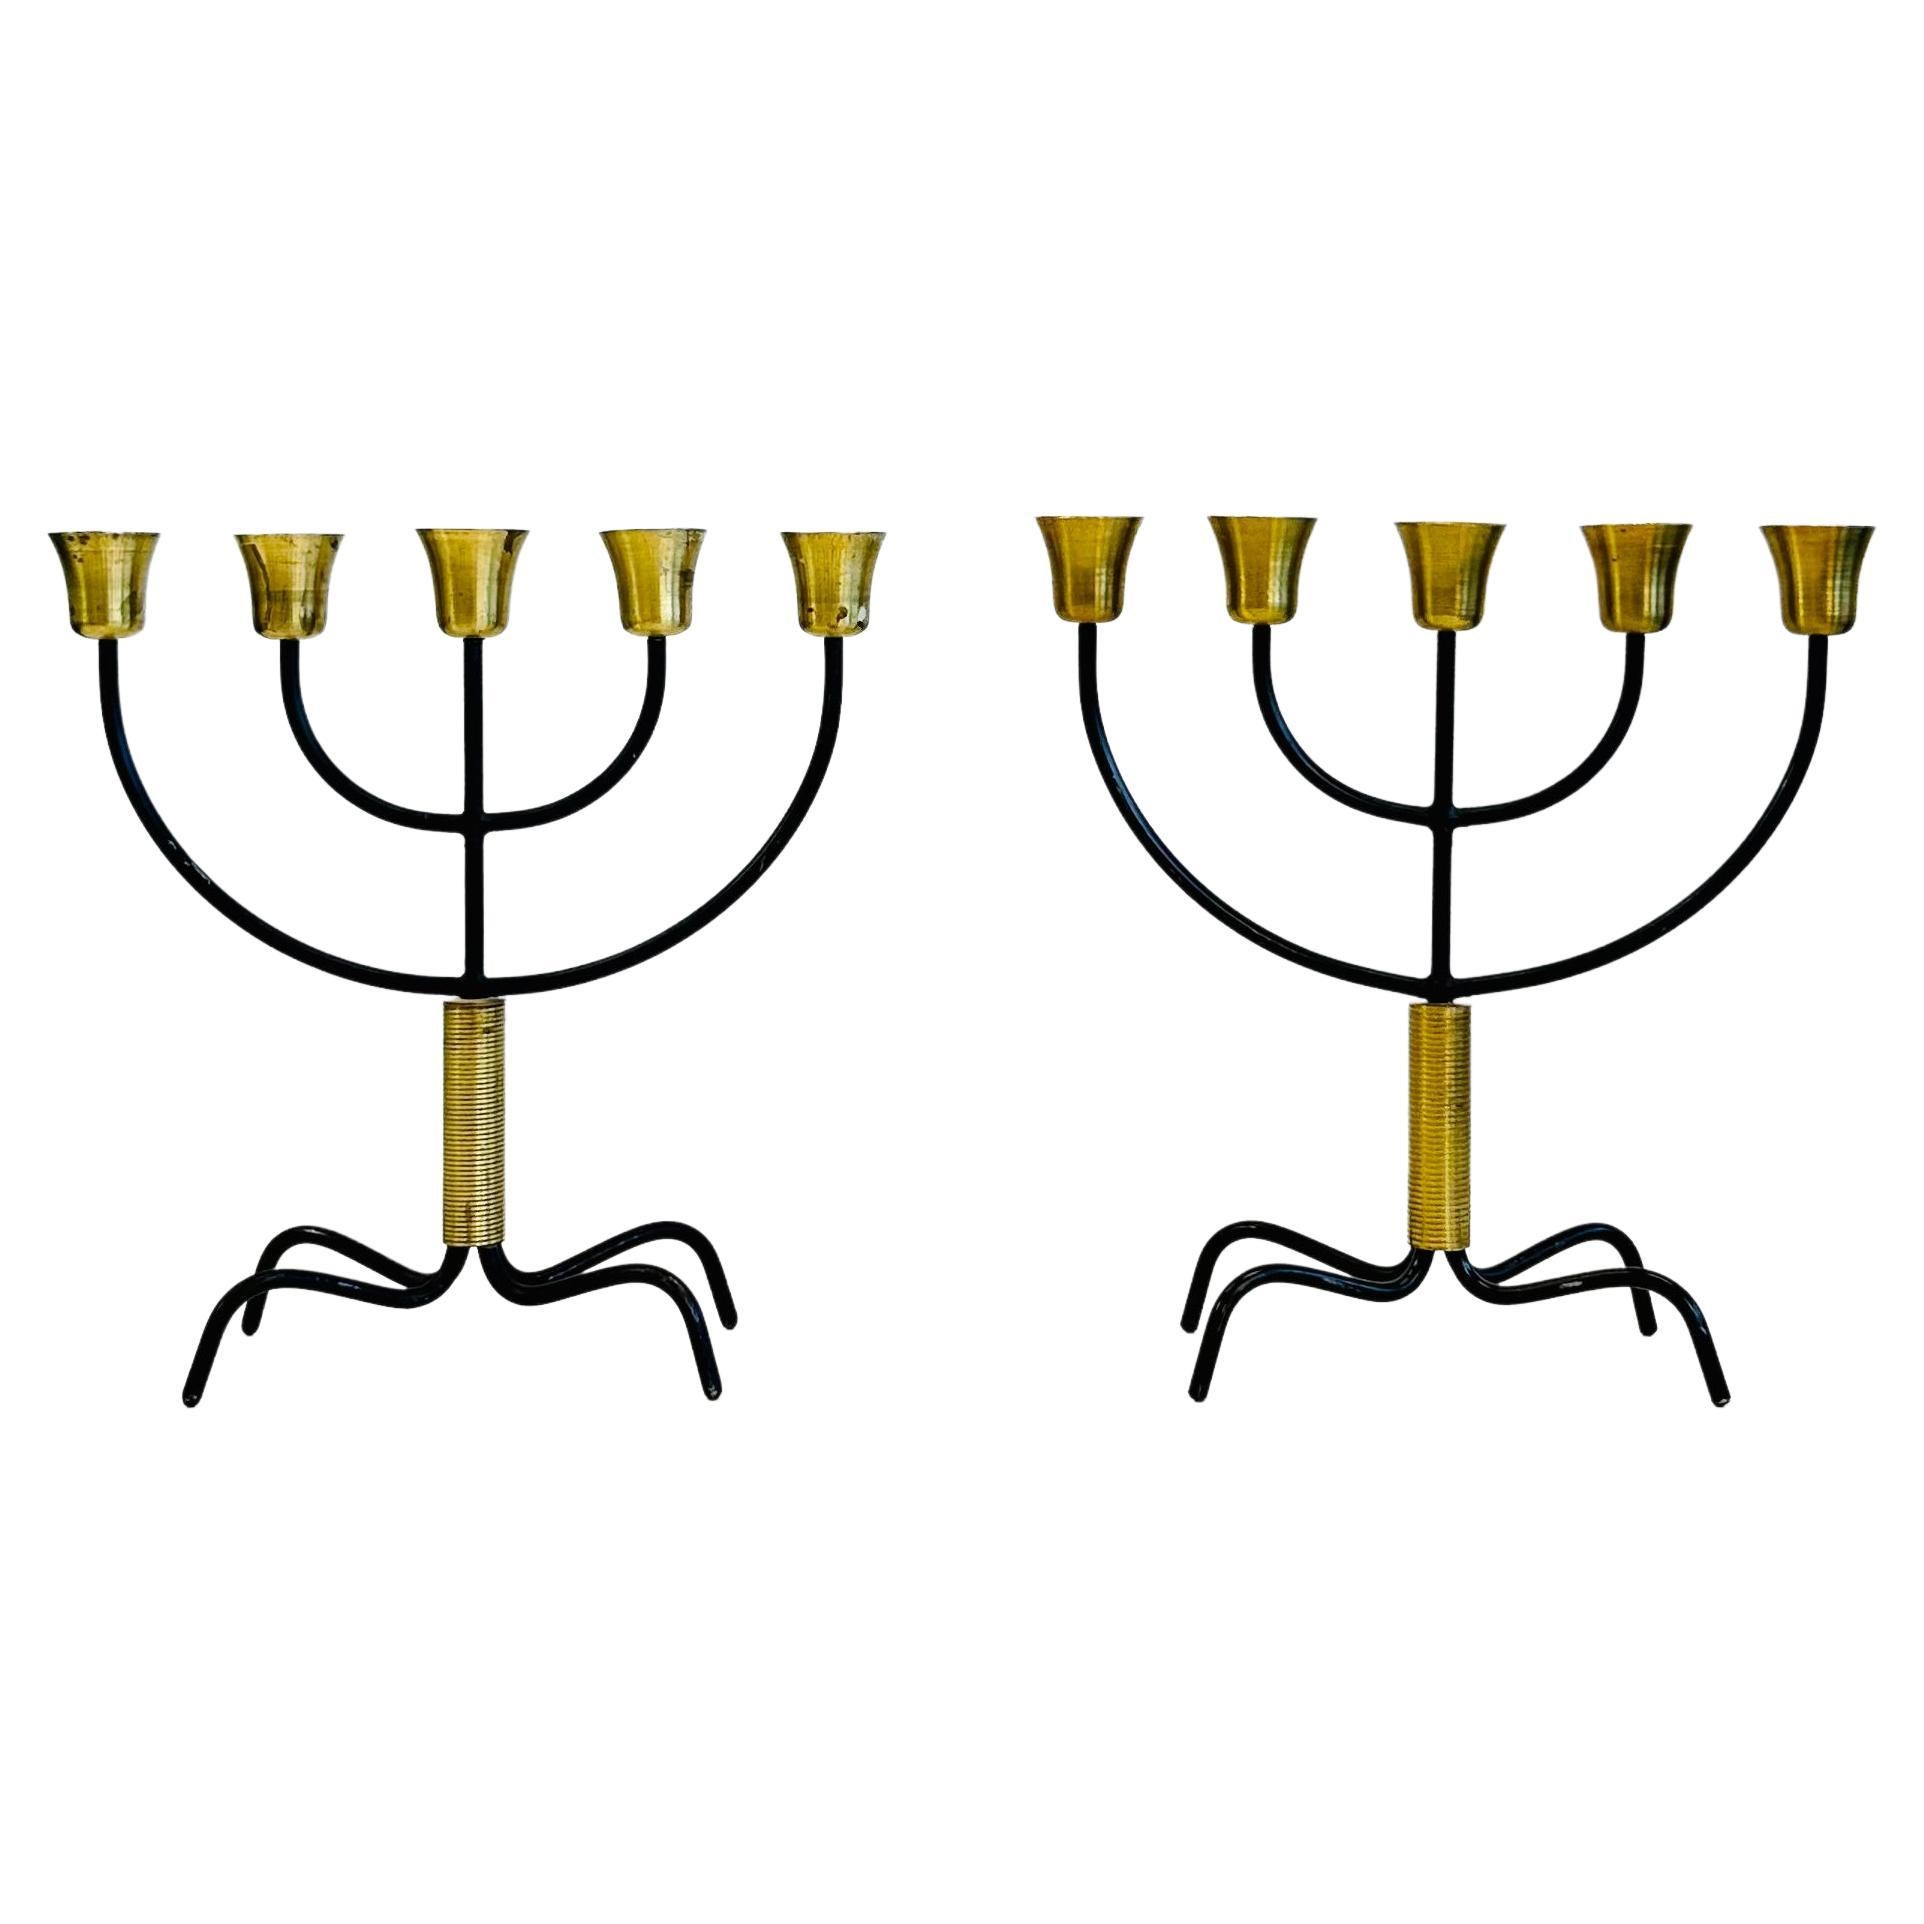 A pair of stunning 5-candle candelabras by the iconic Svend Aage Holm Sørensen. These rare pieces, featuring a beautiful black metal and brass construction, are in very good vintage condition. One of the candelabras boasts the 'Holm Sorensen'